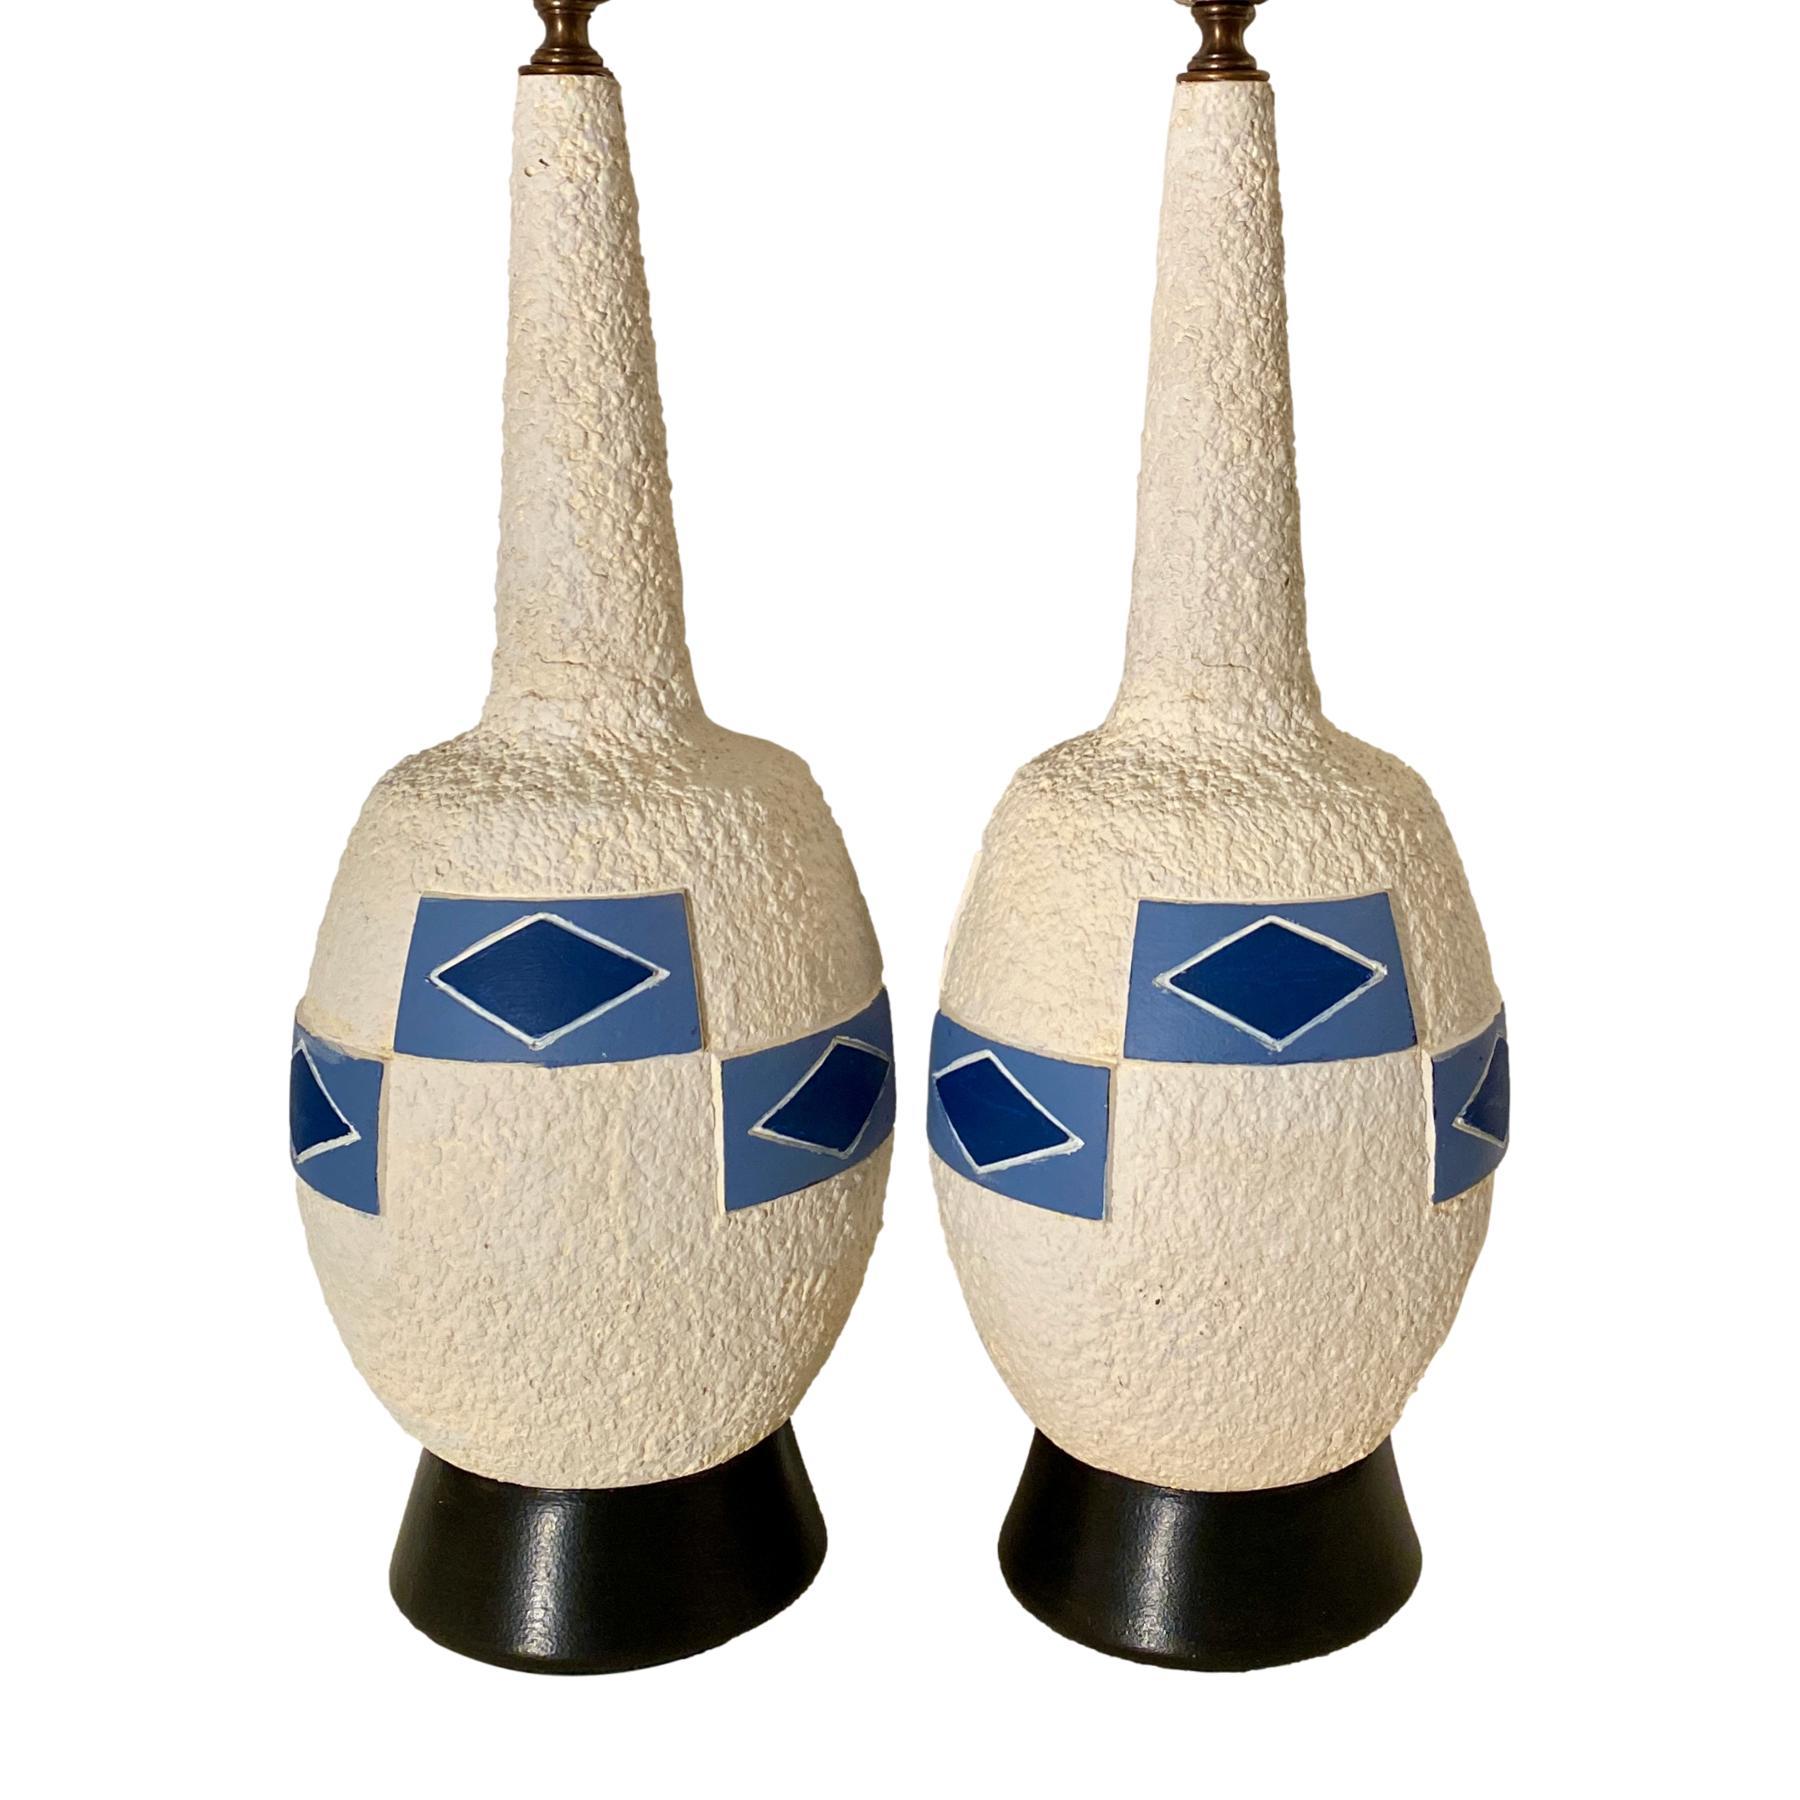 A pair of circa 1960's Italian hand printed ceramic table lamps with painted wood bases.

Measurements:
Height of body 20